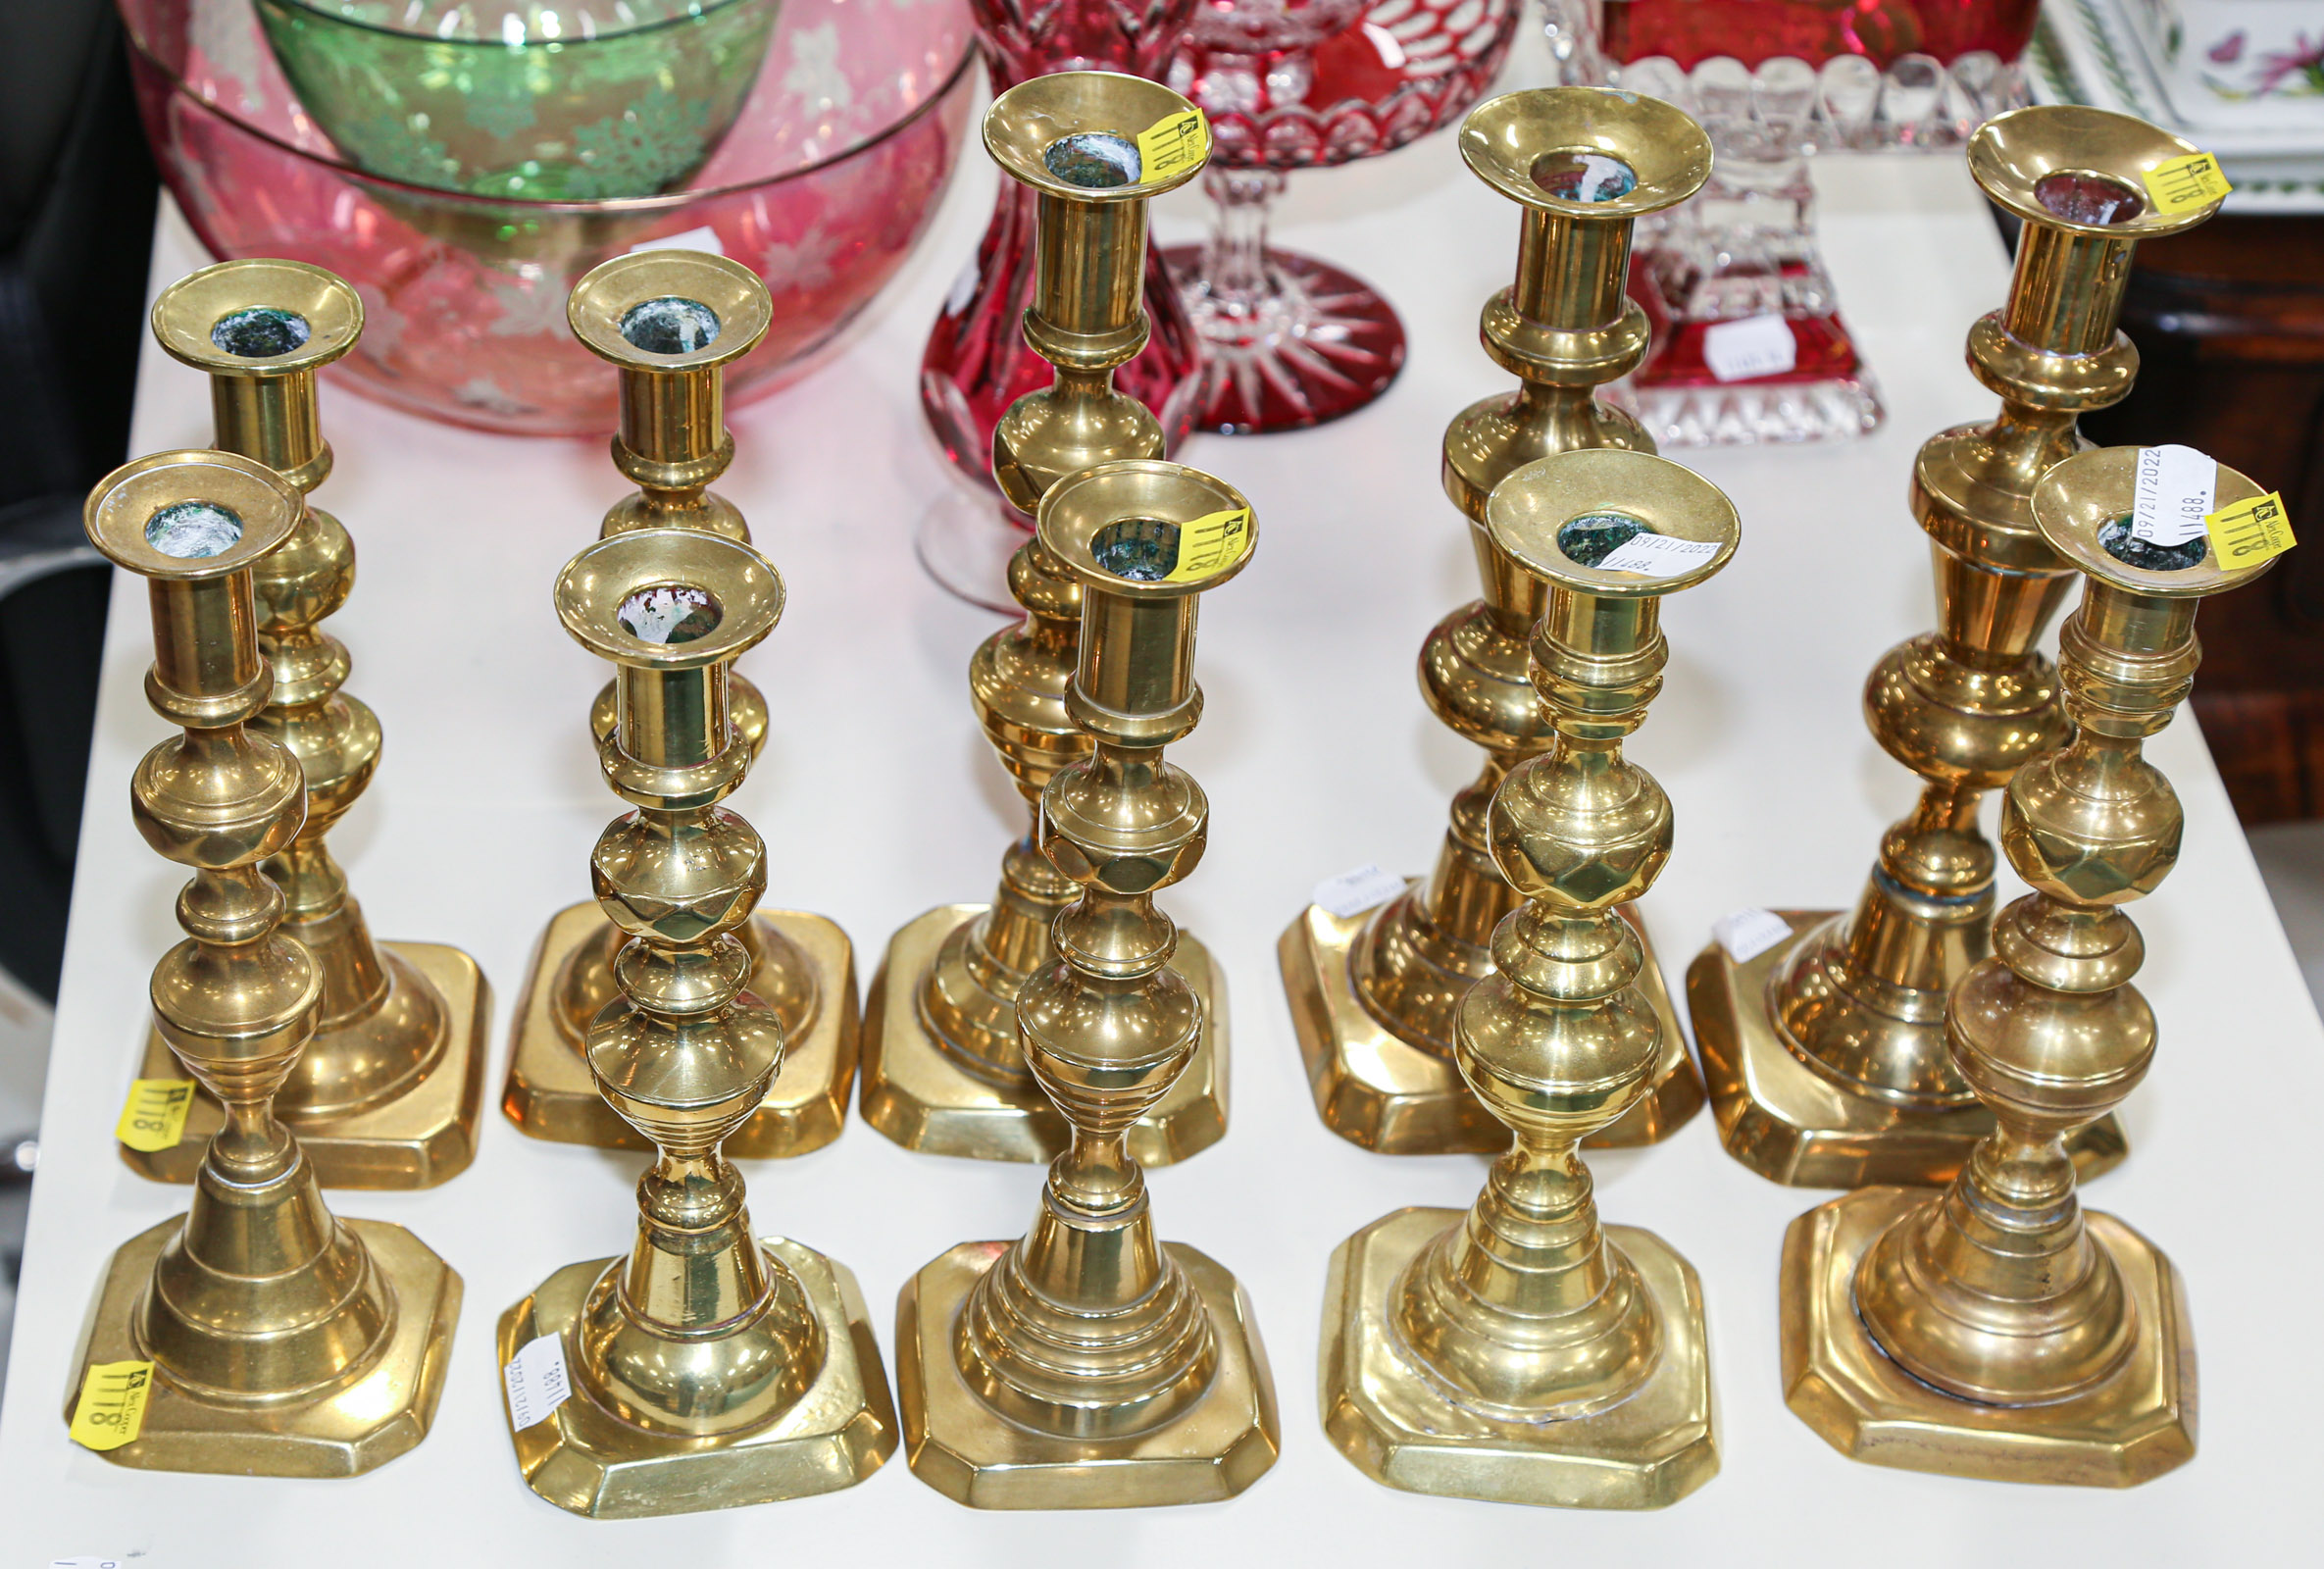 FOUR PAIRS OF ANTIQUE BRASS CANDLESTICKS